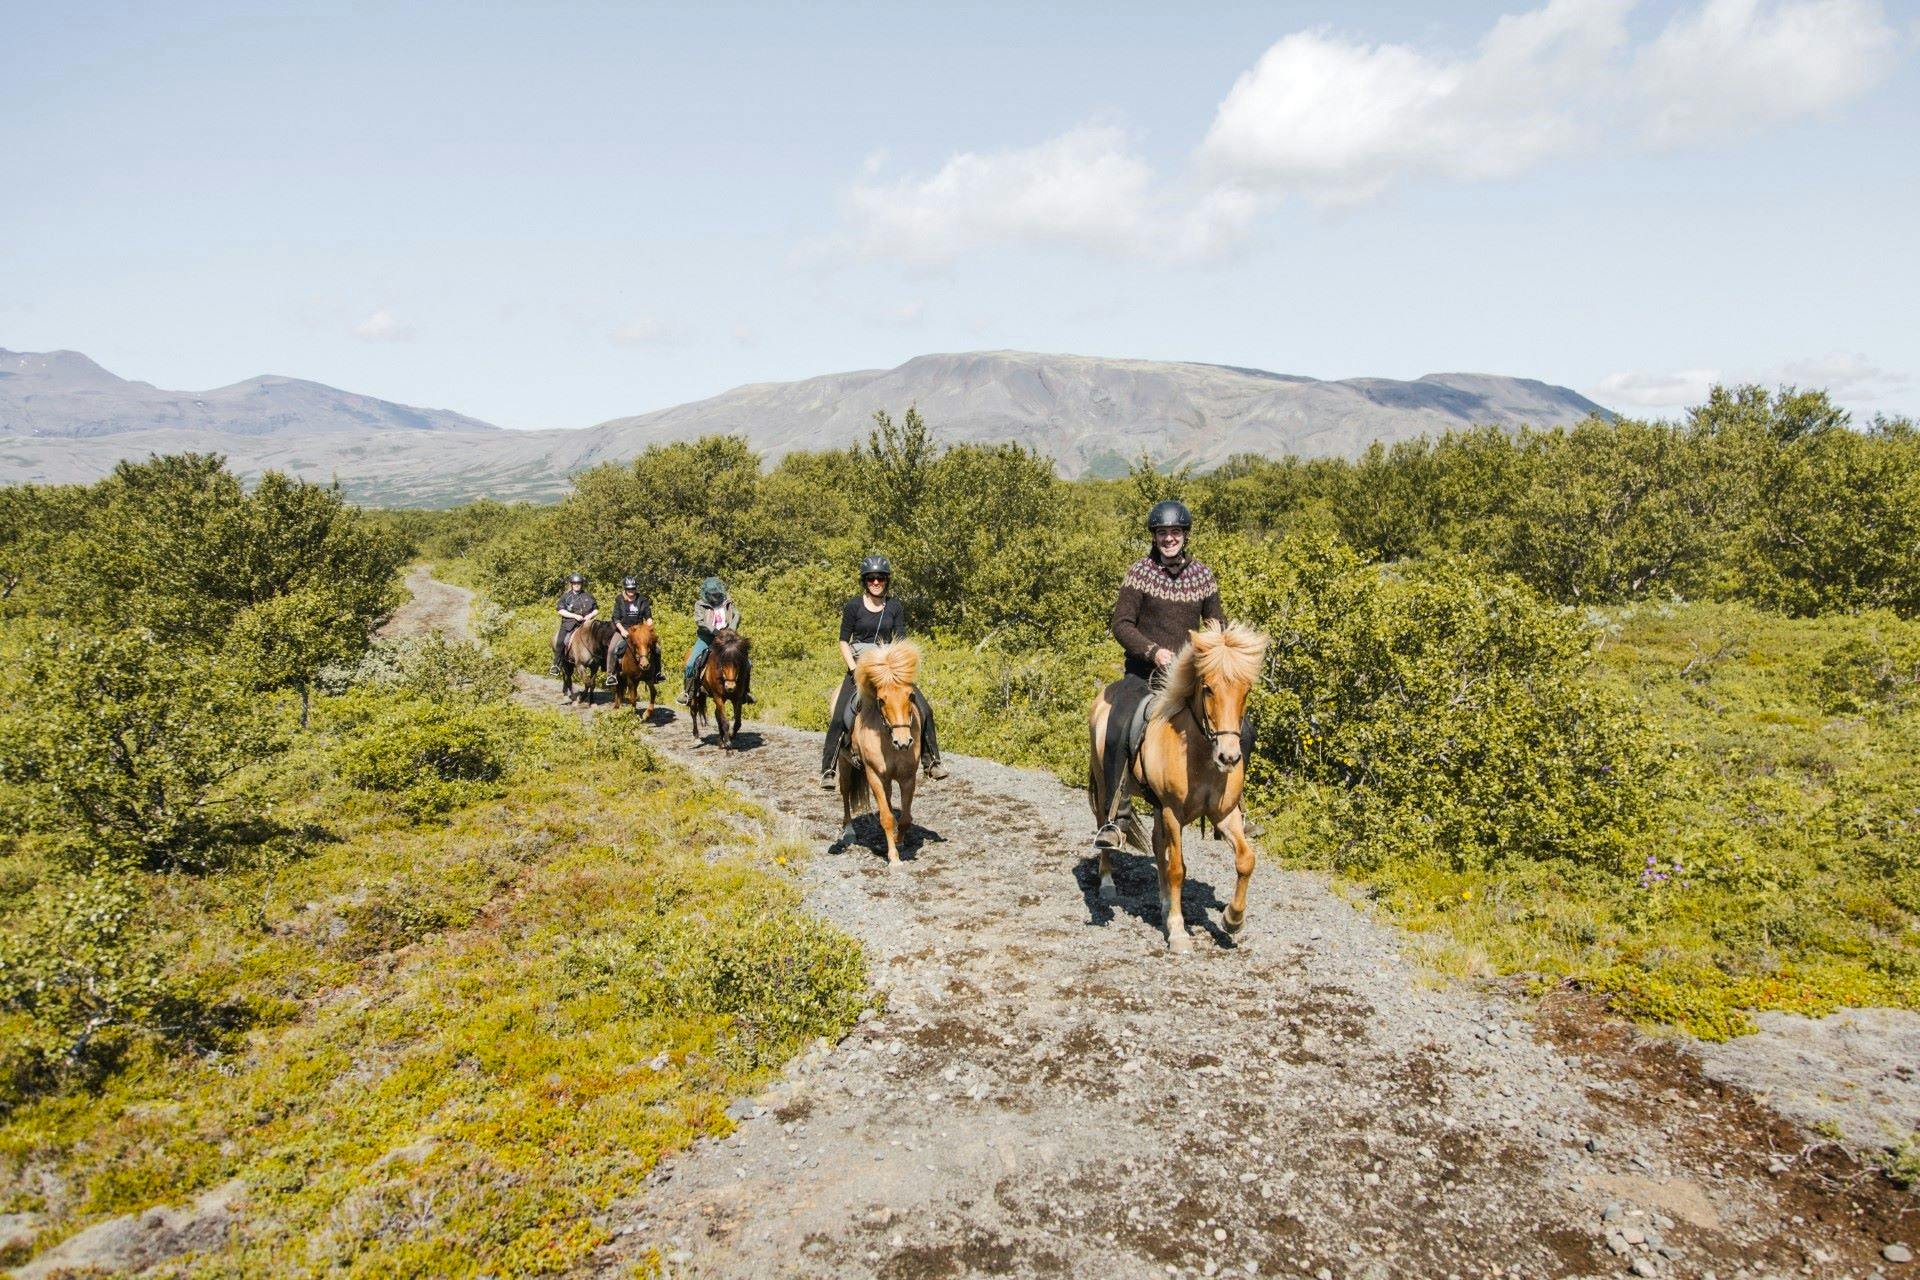 5 riders trotting along a path through green bushes and trees on a sunny day.  Mountains in the background